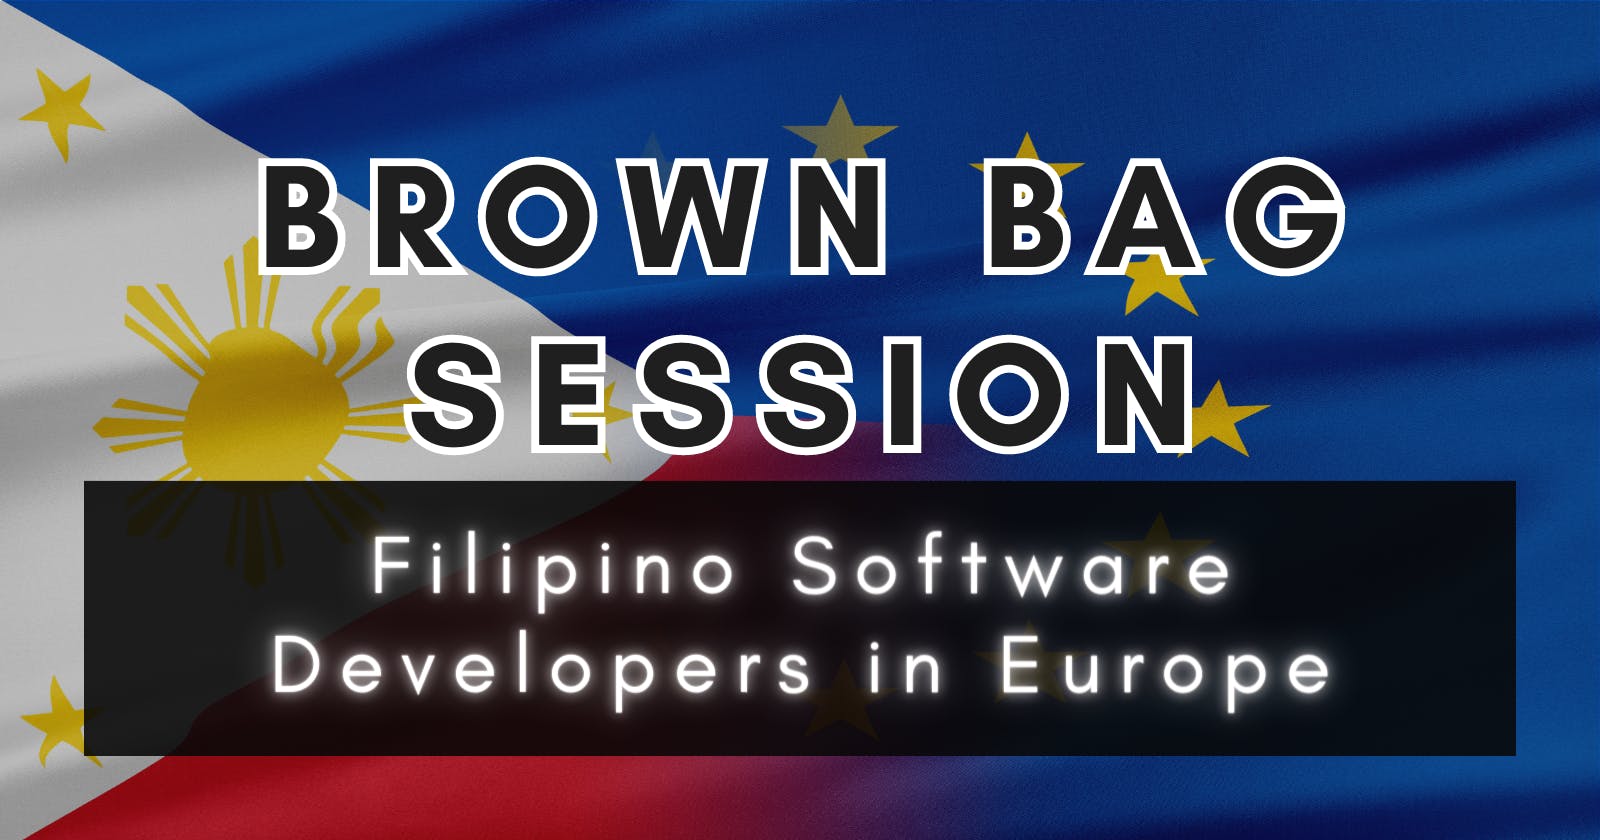 Brown Bag Session: Filipino Software Developers in Europe